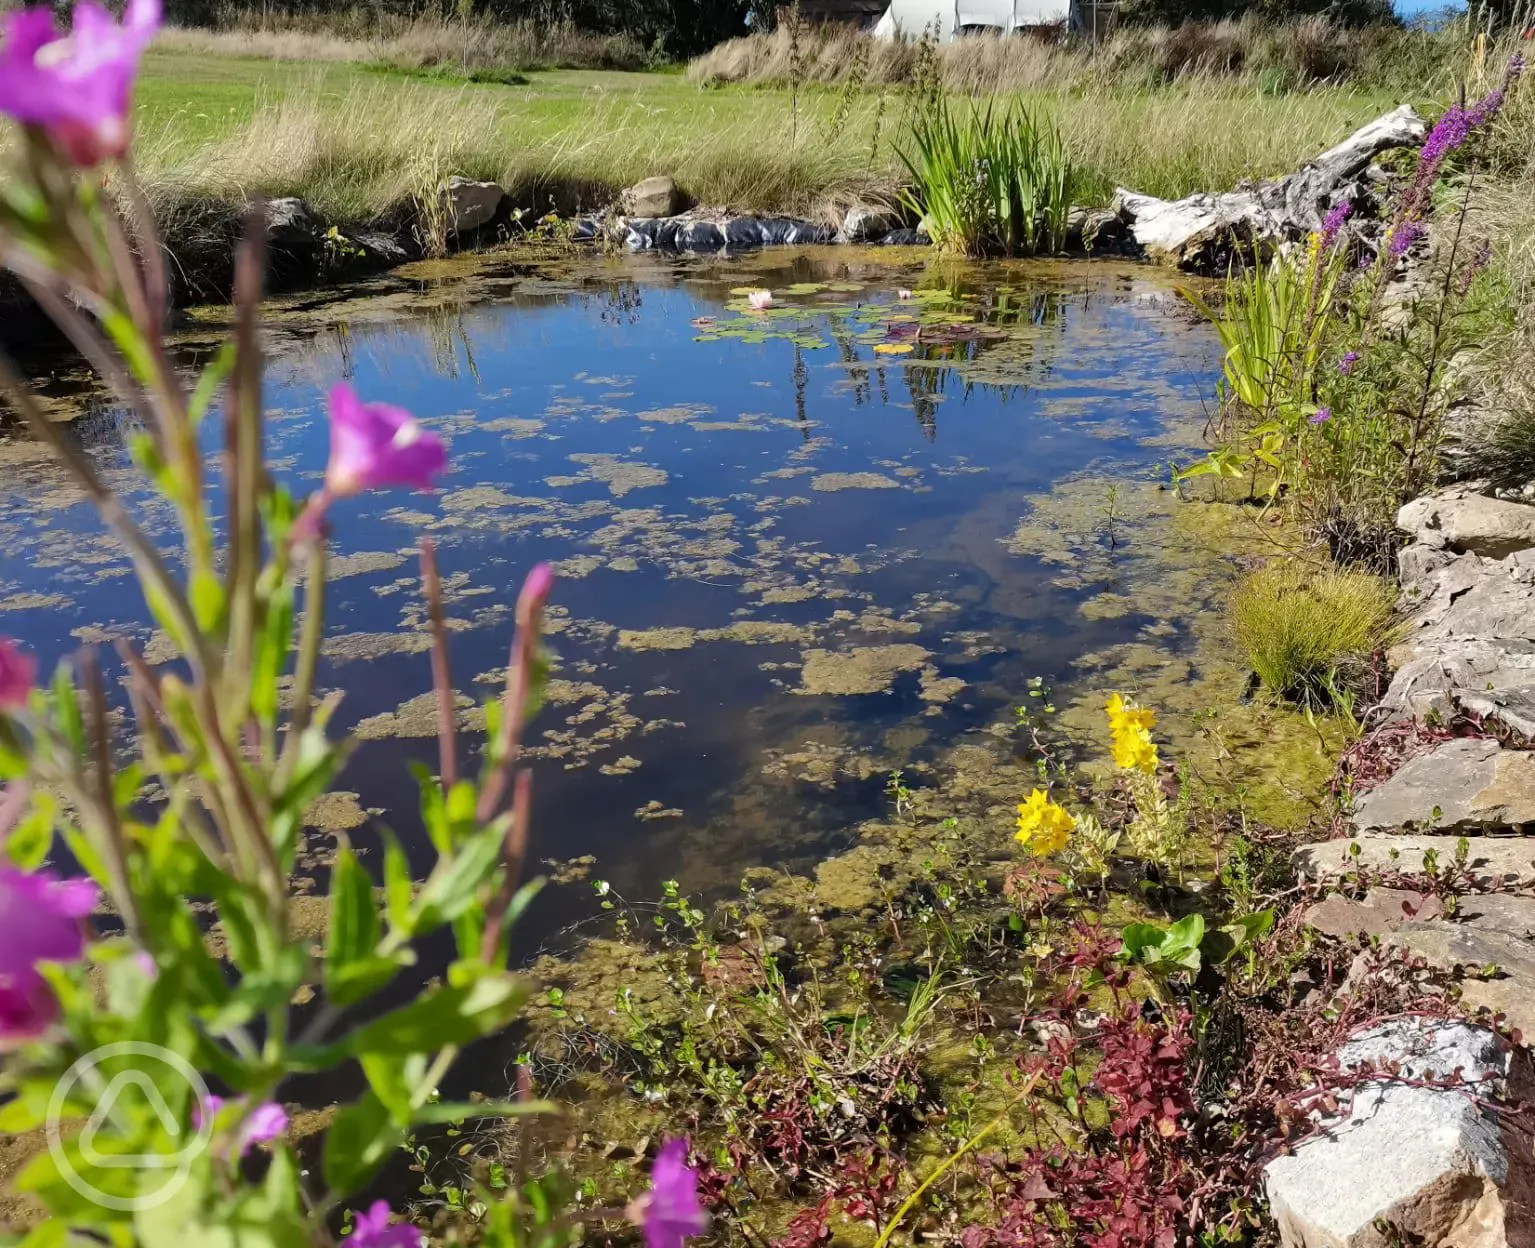 Wildlife pond in the camping field